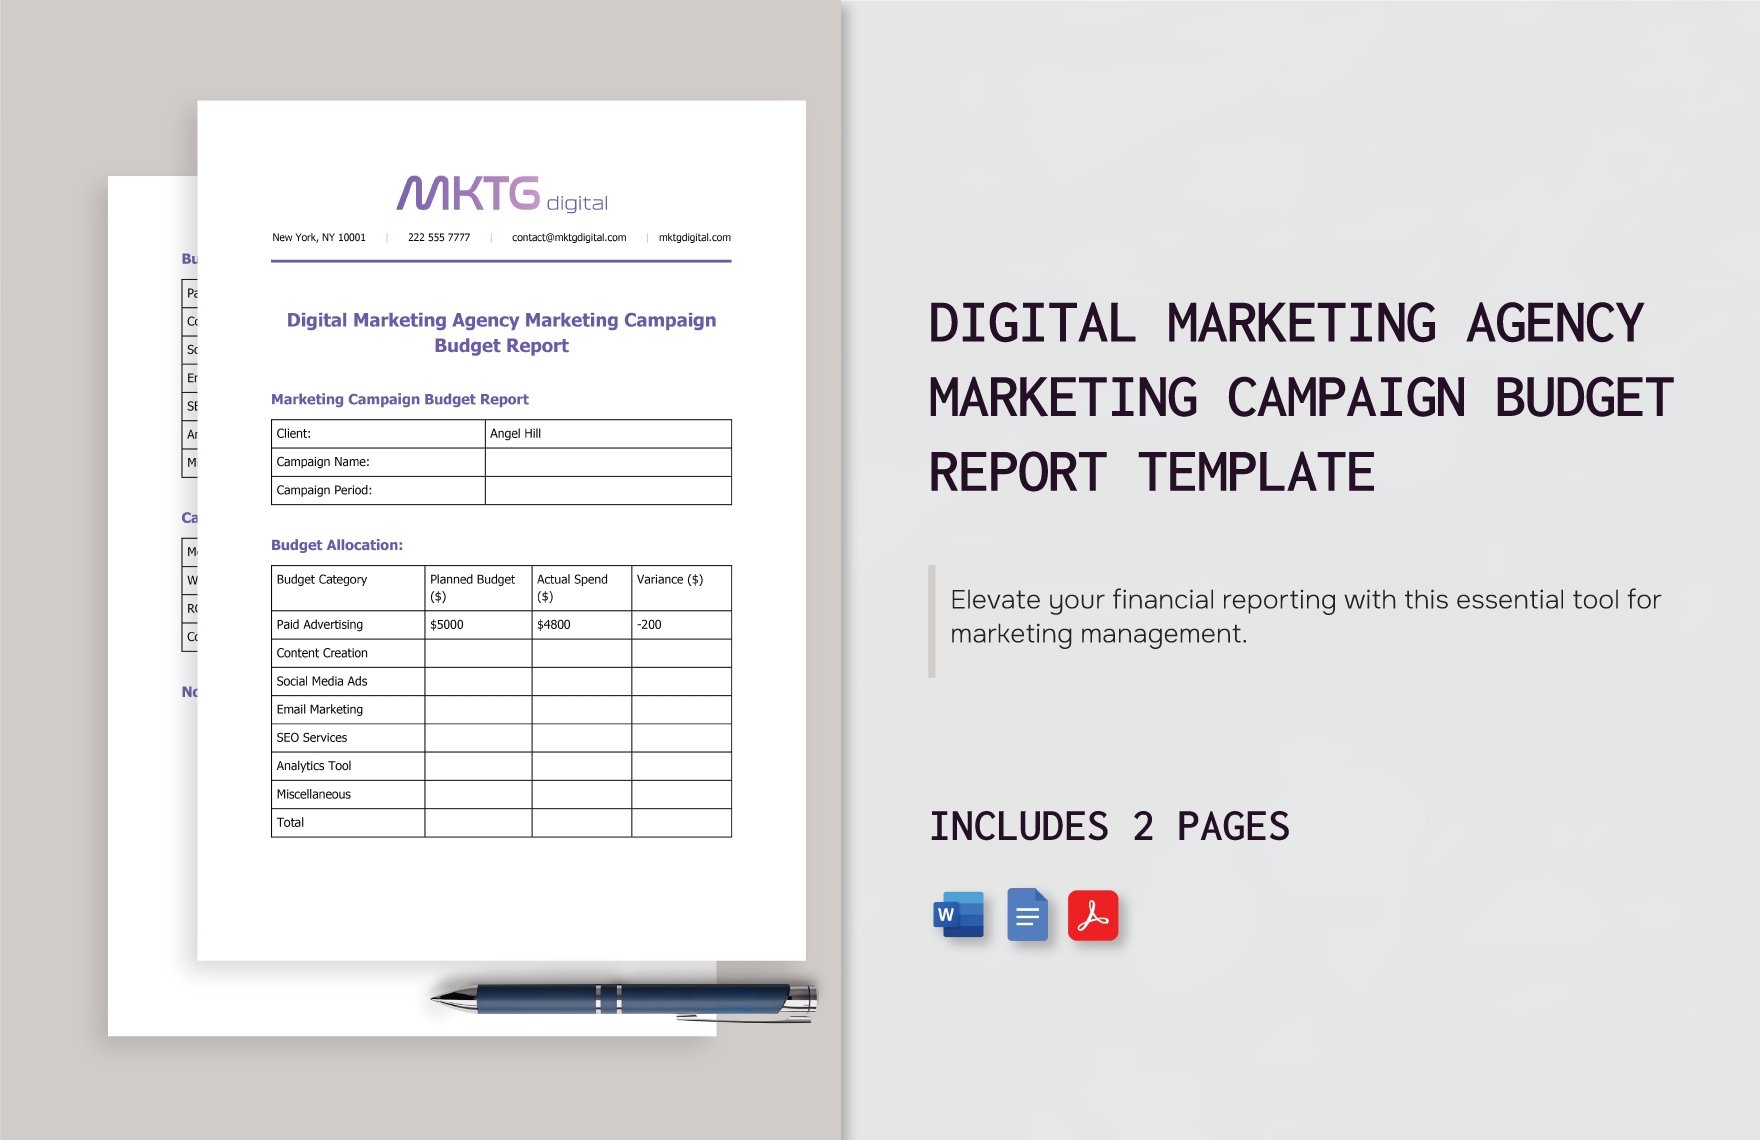 Digital Marketing Agency Marketing Campaign Budget Report Template in Word, Google Docs, PDF